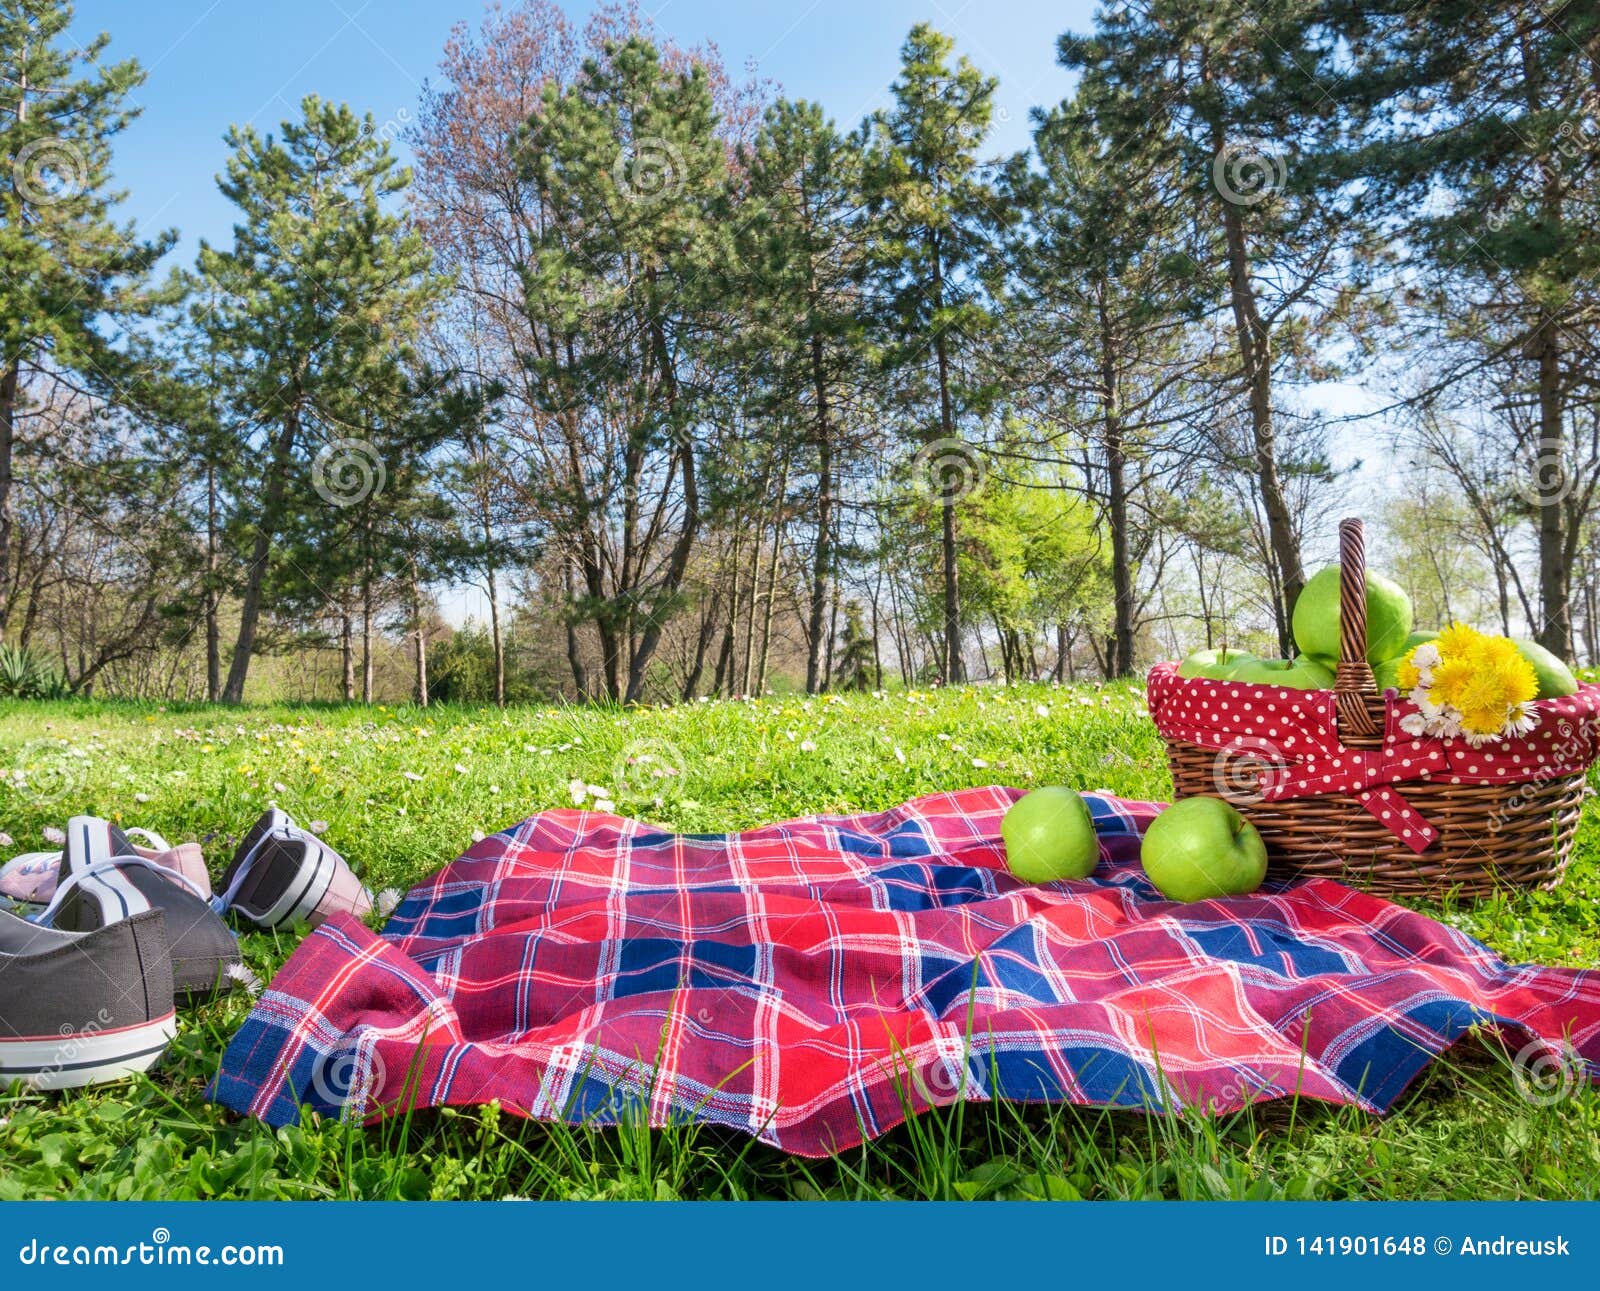 A Picnic Background With Basket And Blanket Outdoors Stock Photo - Image of outdoors, green ...